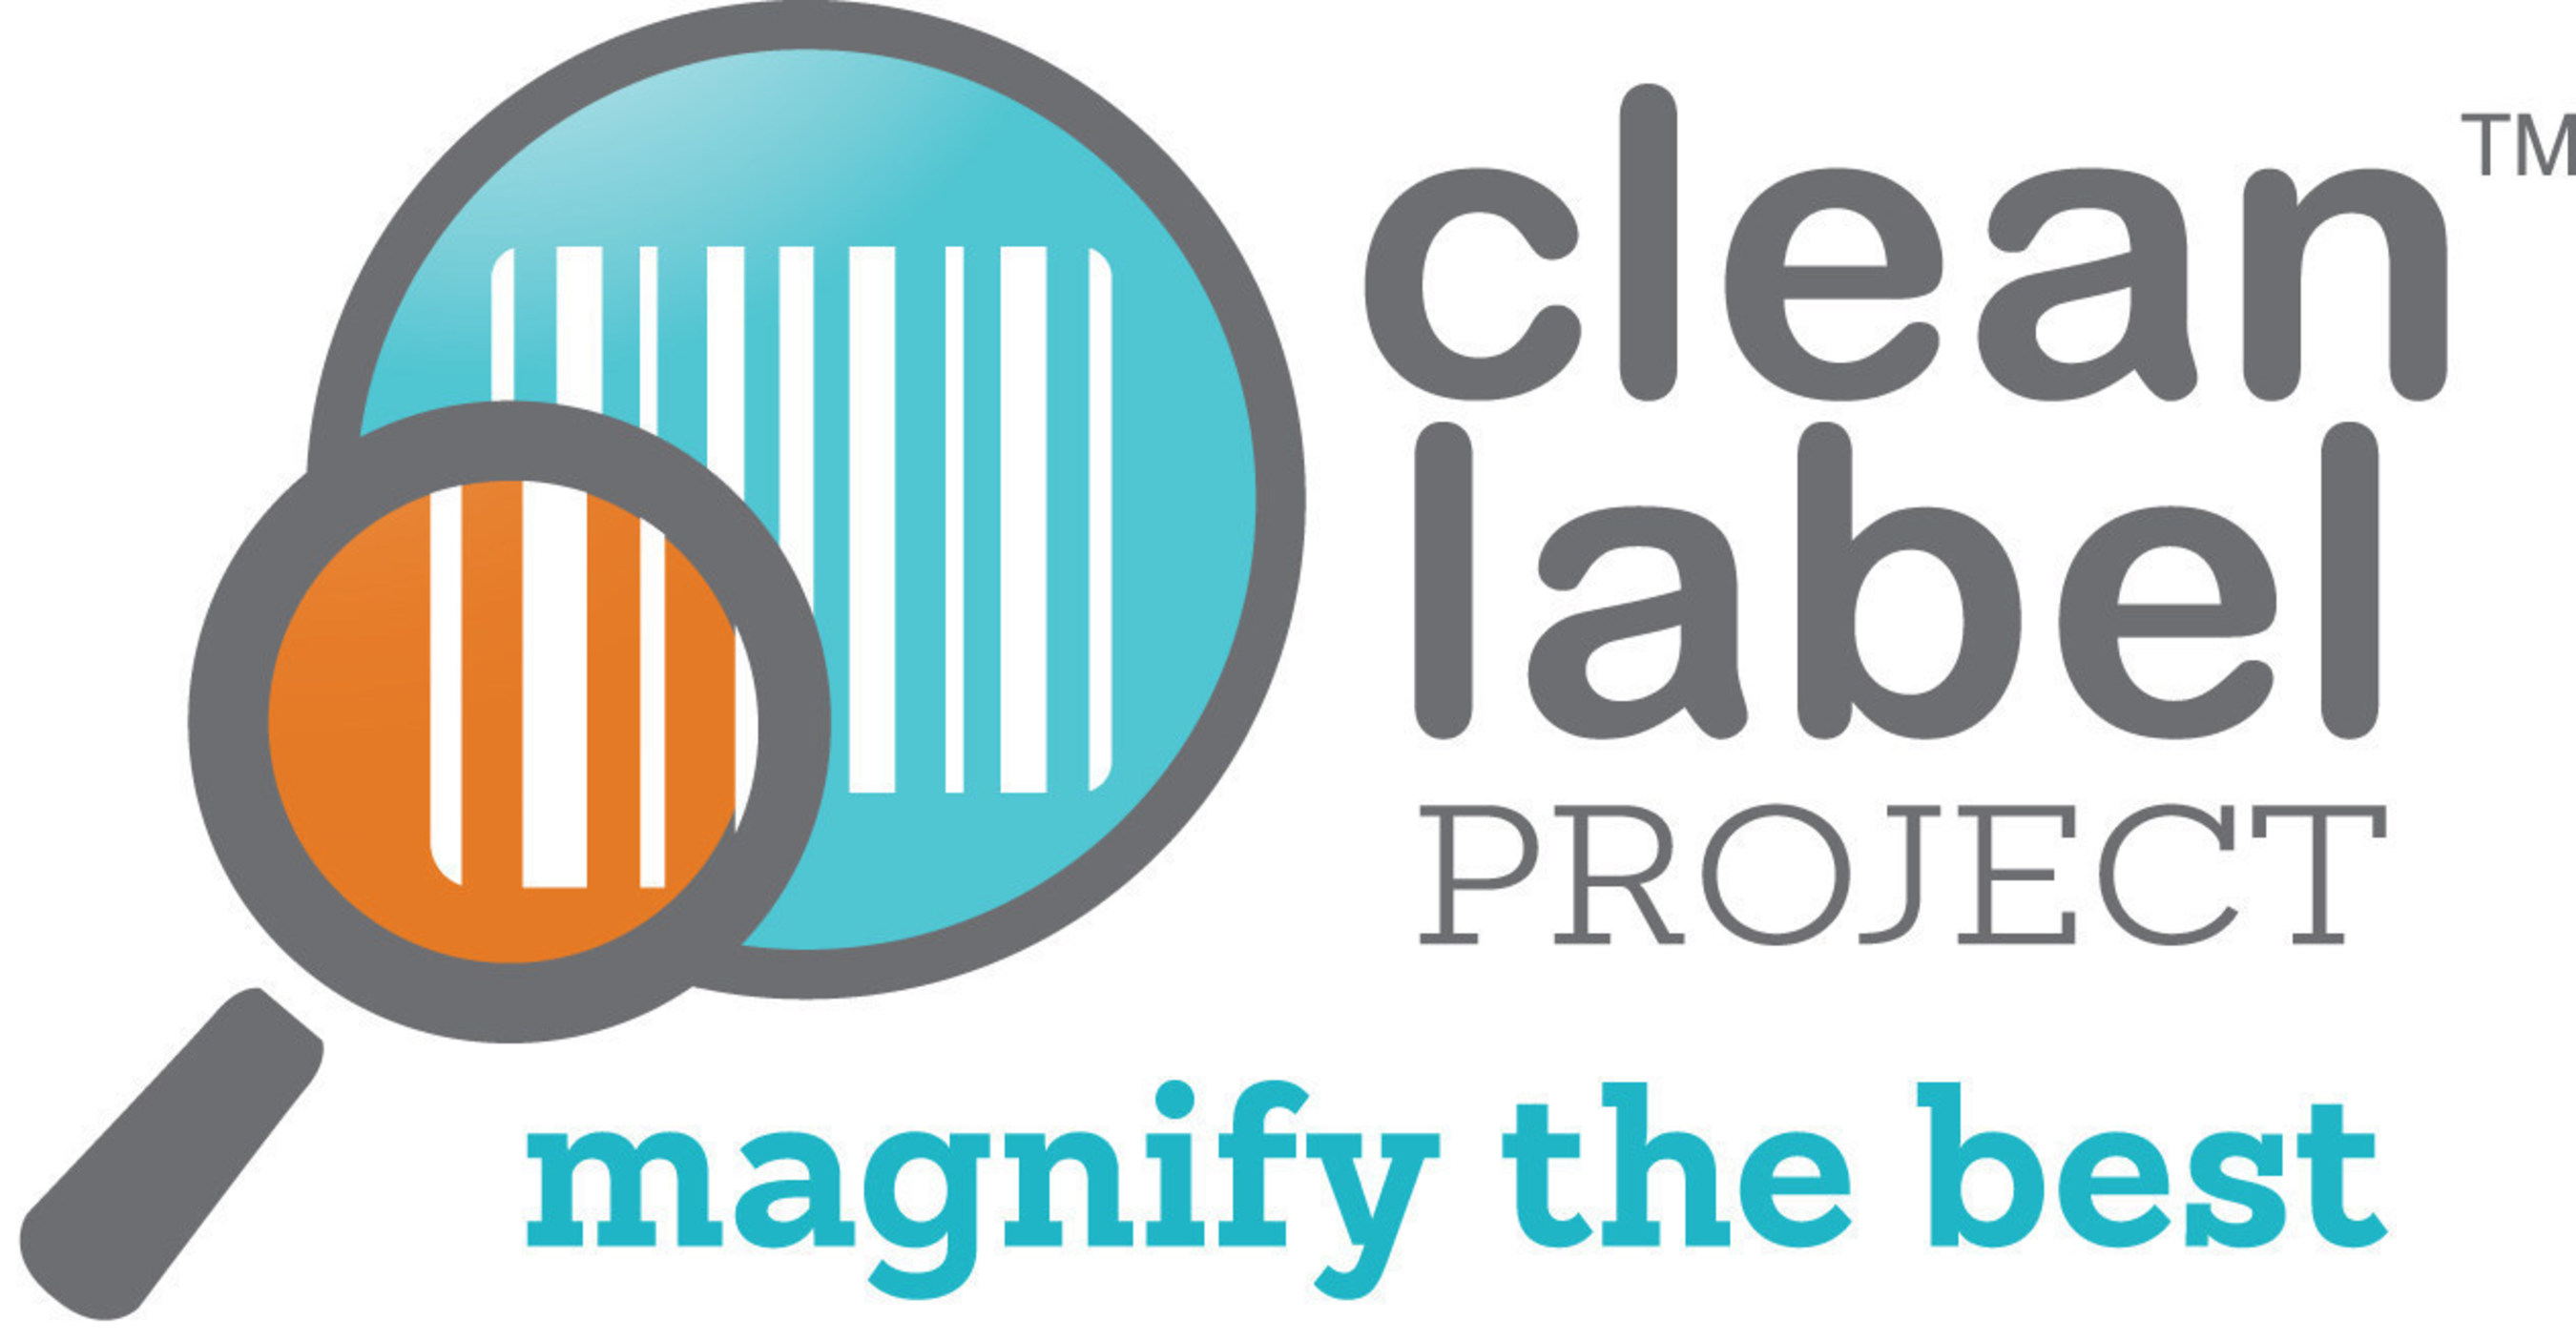 Clean Label Project is the first and only organization to provide consumers with information to help them choose the purest foods based on independent laboratory tests for 130 additives and chemicals that do not appear on ingredient labels, including arsenic, lead, cadmium, antibiotic and pesticide residues.